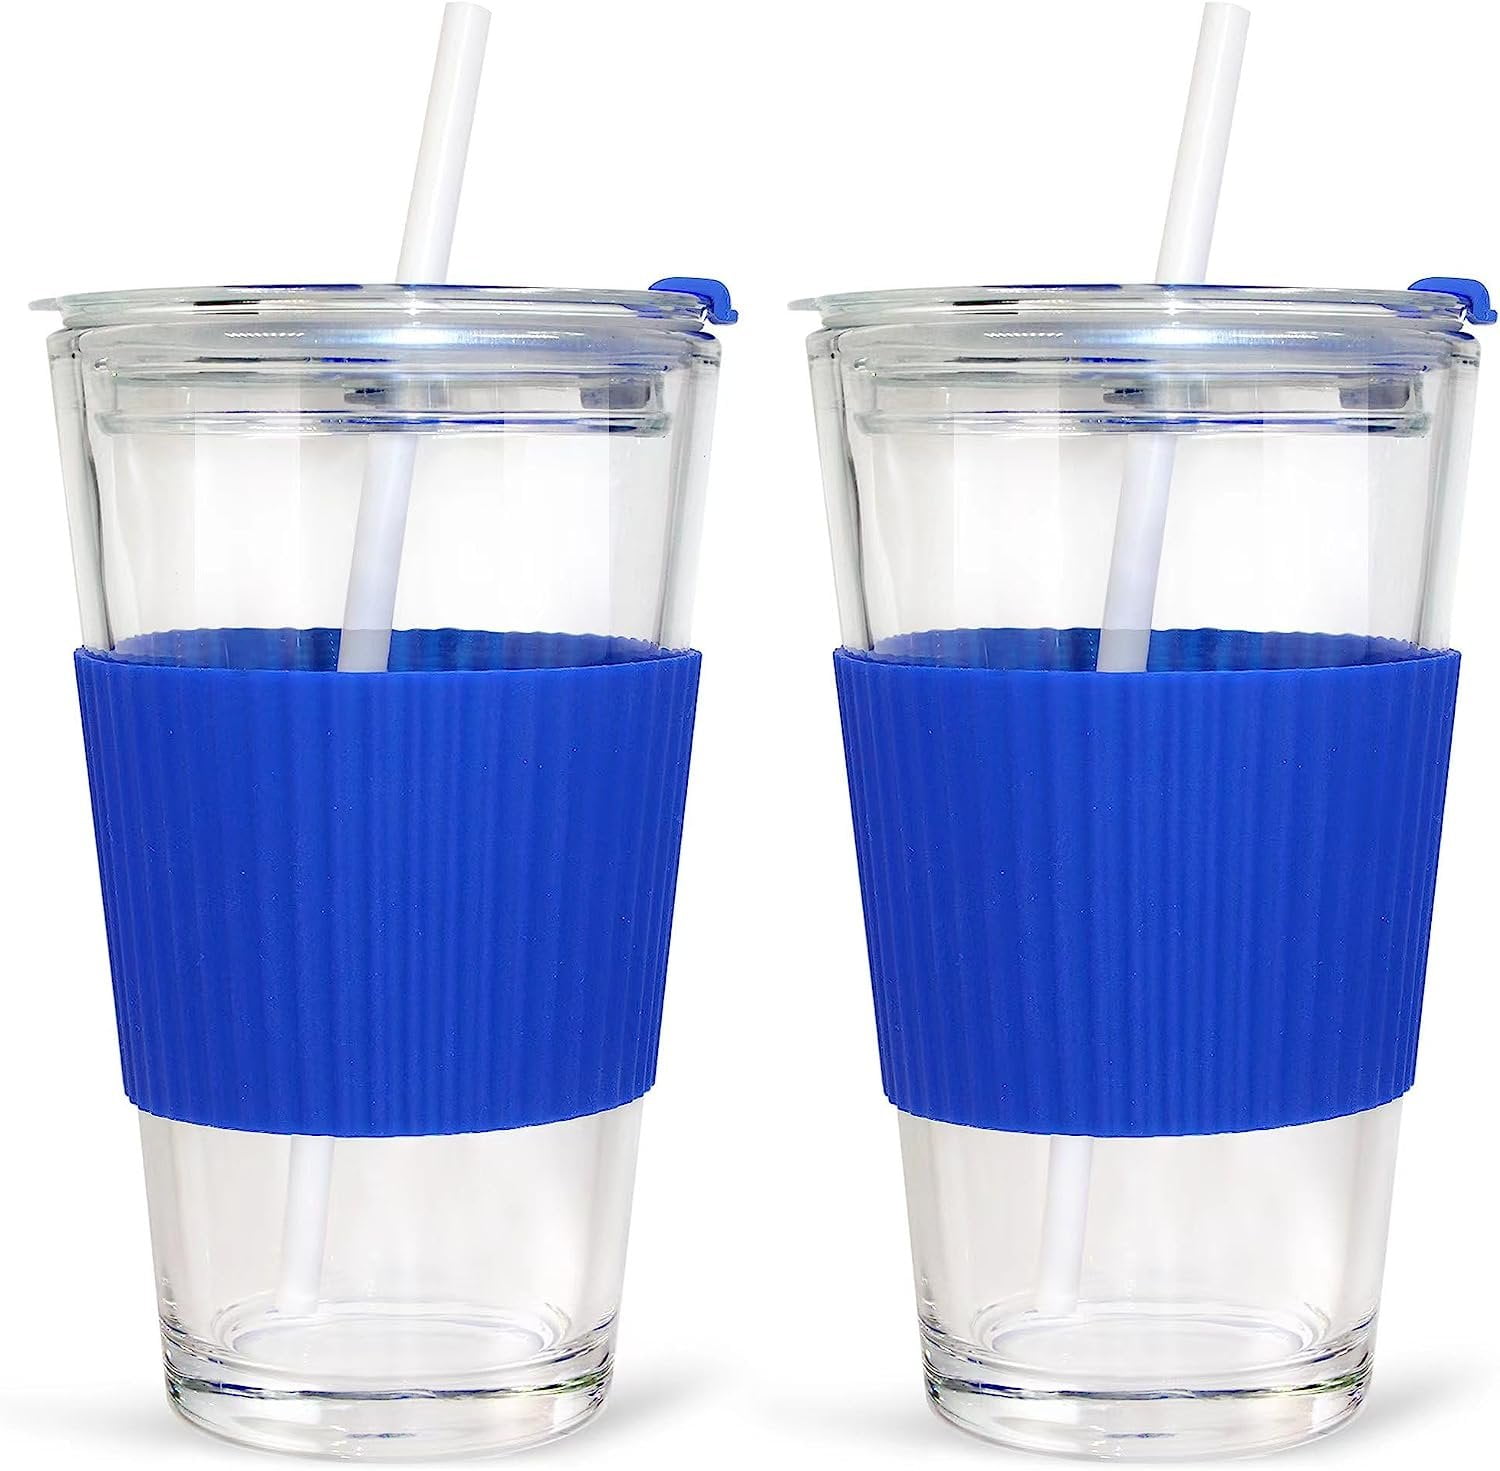 Stanley - Did you know? Our IceFlow Flip Straw Tumblers and Jugs take  sustainability to the next level. Utilizing Oceanworks recycling solutions,  every 1,000 Classic IceFlow Jugs made removes nearly 100 pounds